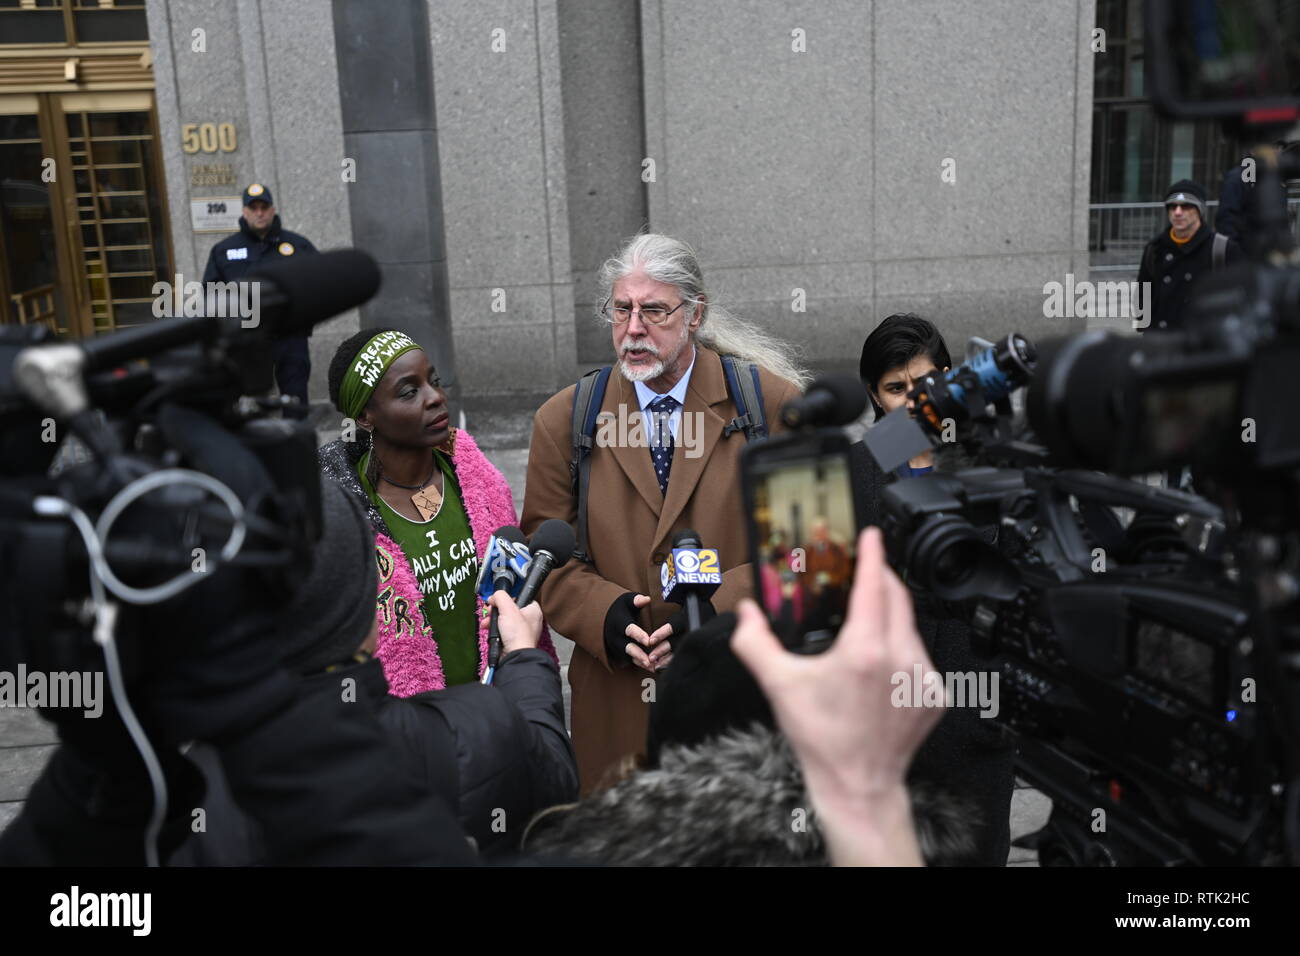 New York, NY, USA. 1 March 2019 New York US Statue of Liberty climber Patricia Okoumou and her lawyers speak to reporters outside federal court after a magistrate judge ordered her confined to her home with electronic monitoring.  Prosecutors had asked that her bail be revoked after she was arrested for climbing a school for immigrant children in Austin, Texas, in another act of civil disobedience to protest against Trump administration immigration policies. Credit: Joseph Reid/Alamy Live News Stock Photo